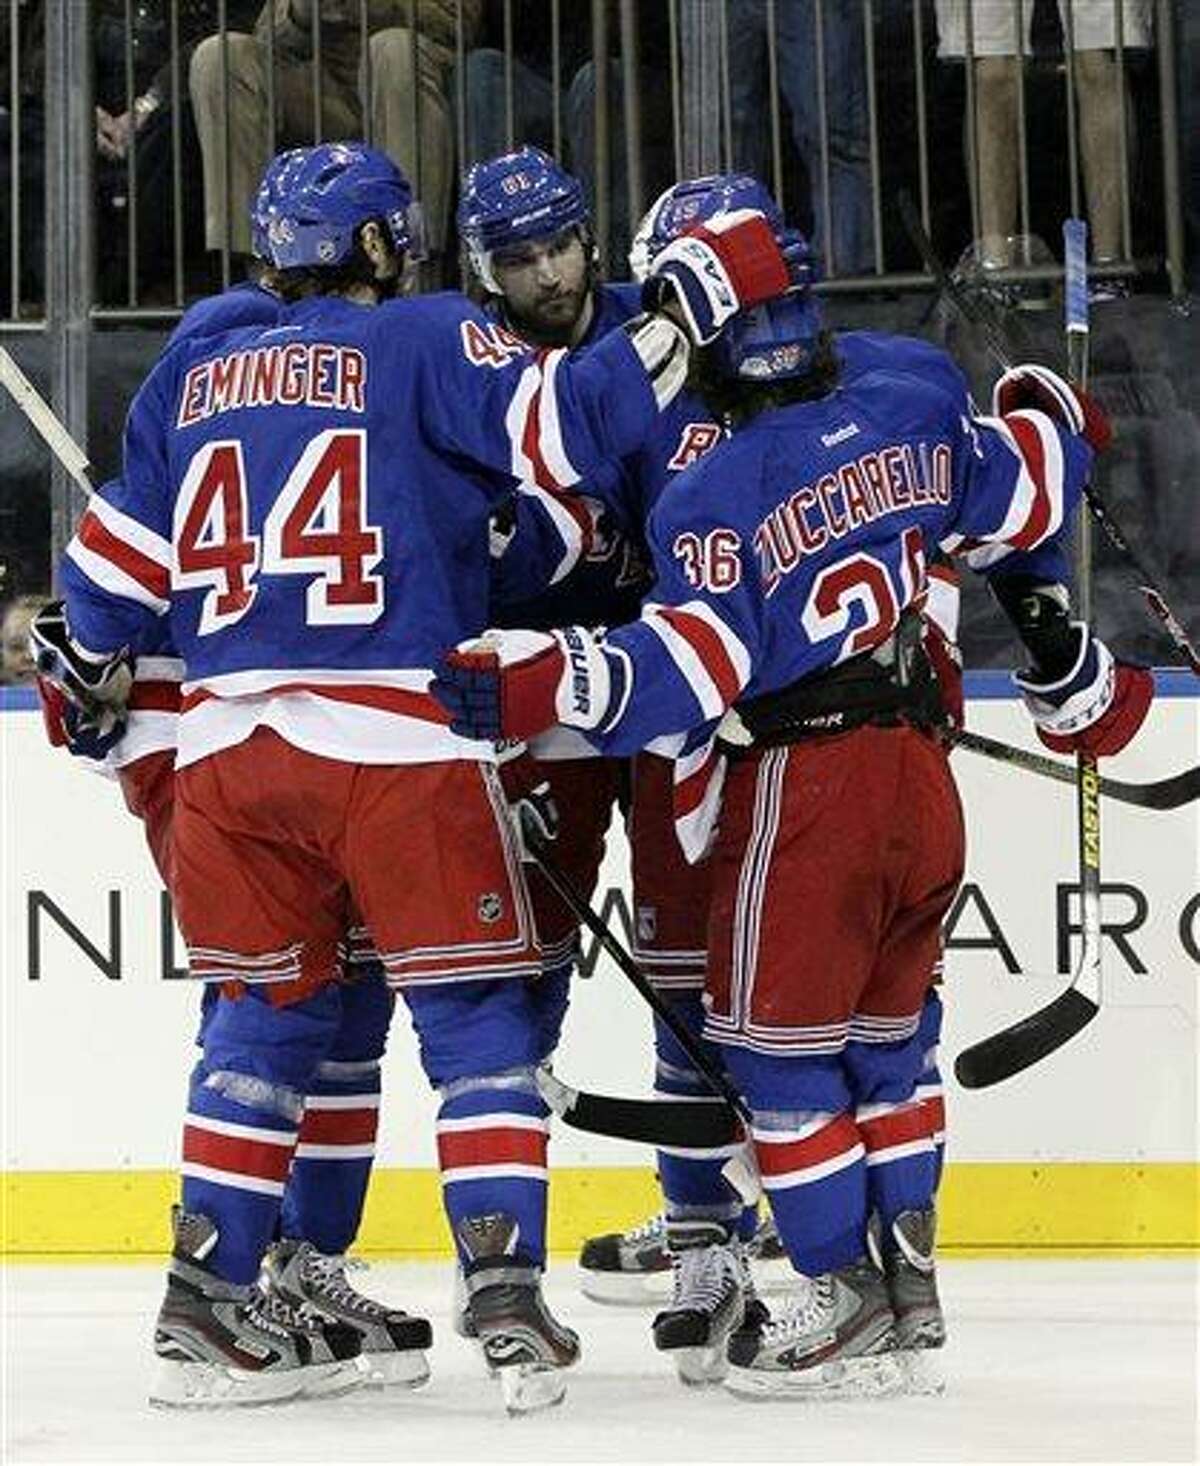 New York Rangers' Rick Nash, center, celebrates with his teammates after scoring a goal during the second period of an NHL hockey game against the New Jersey Devils, Saturday, April 27, 2013 at Madison Square Garden in New York. The Rangers won 4-0. (AP Photo/Mary Altaffer)